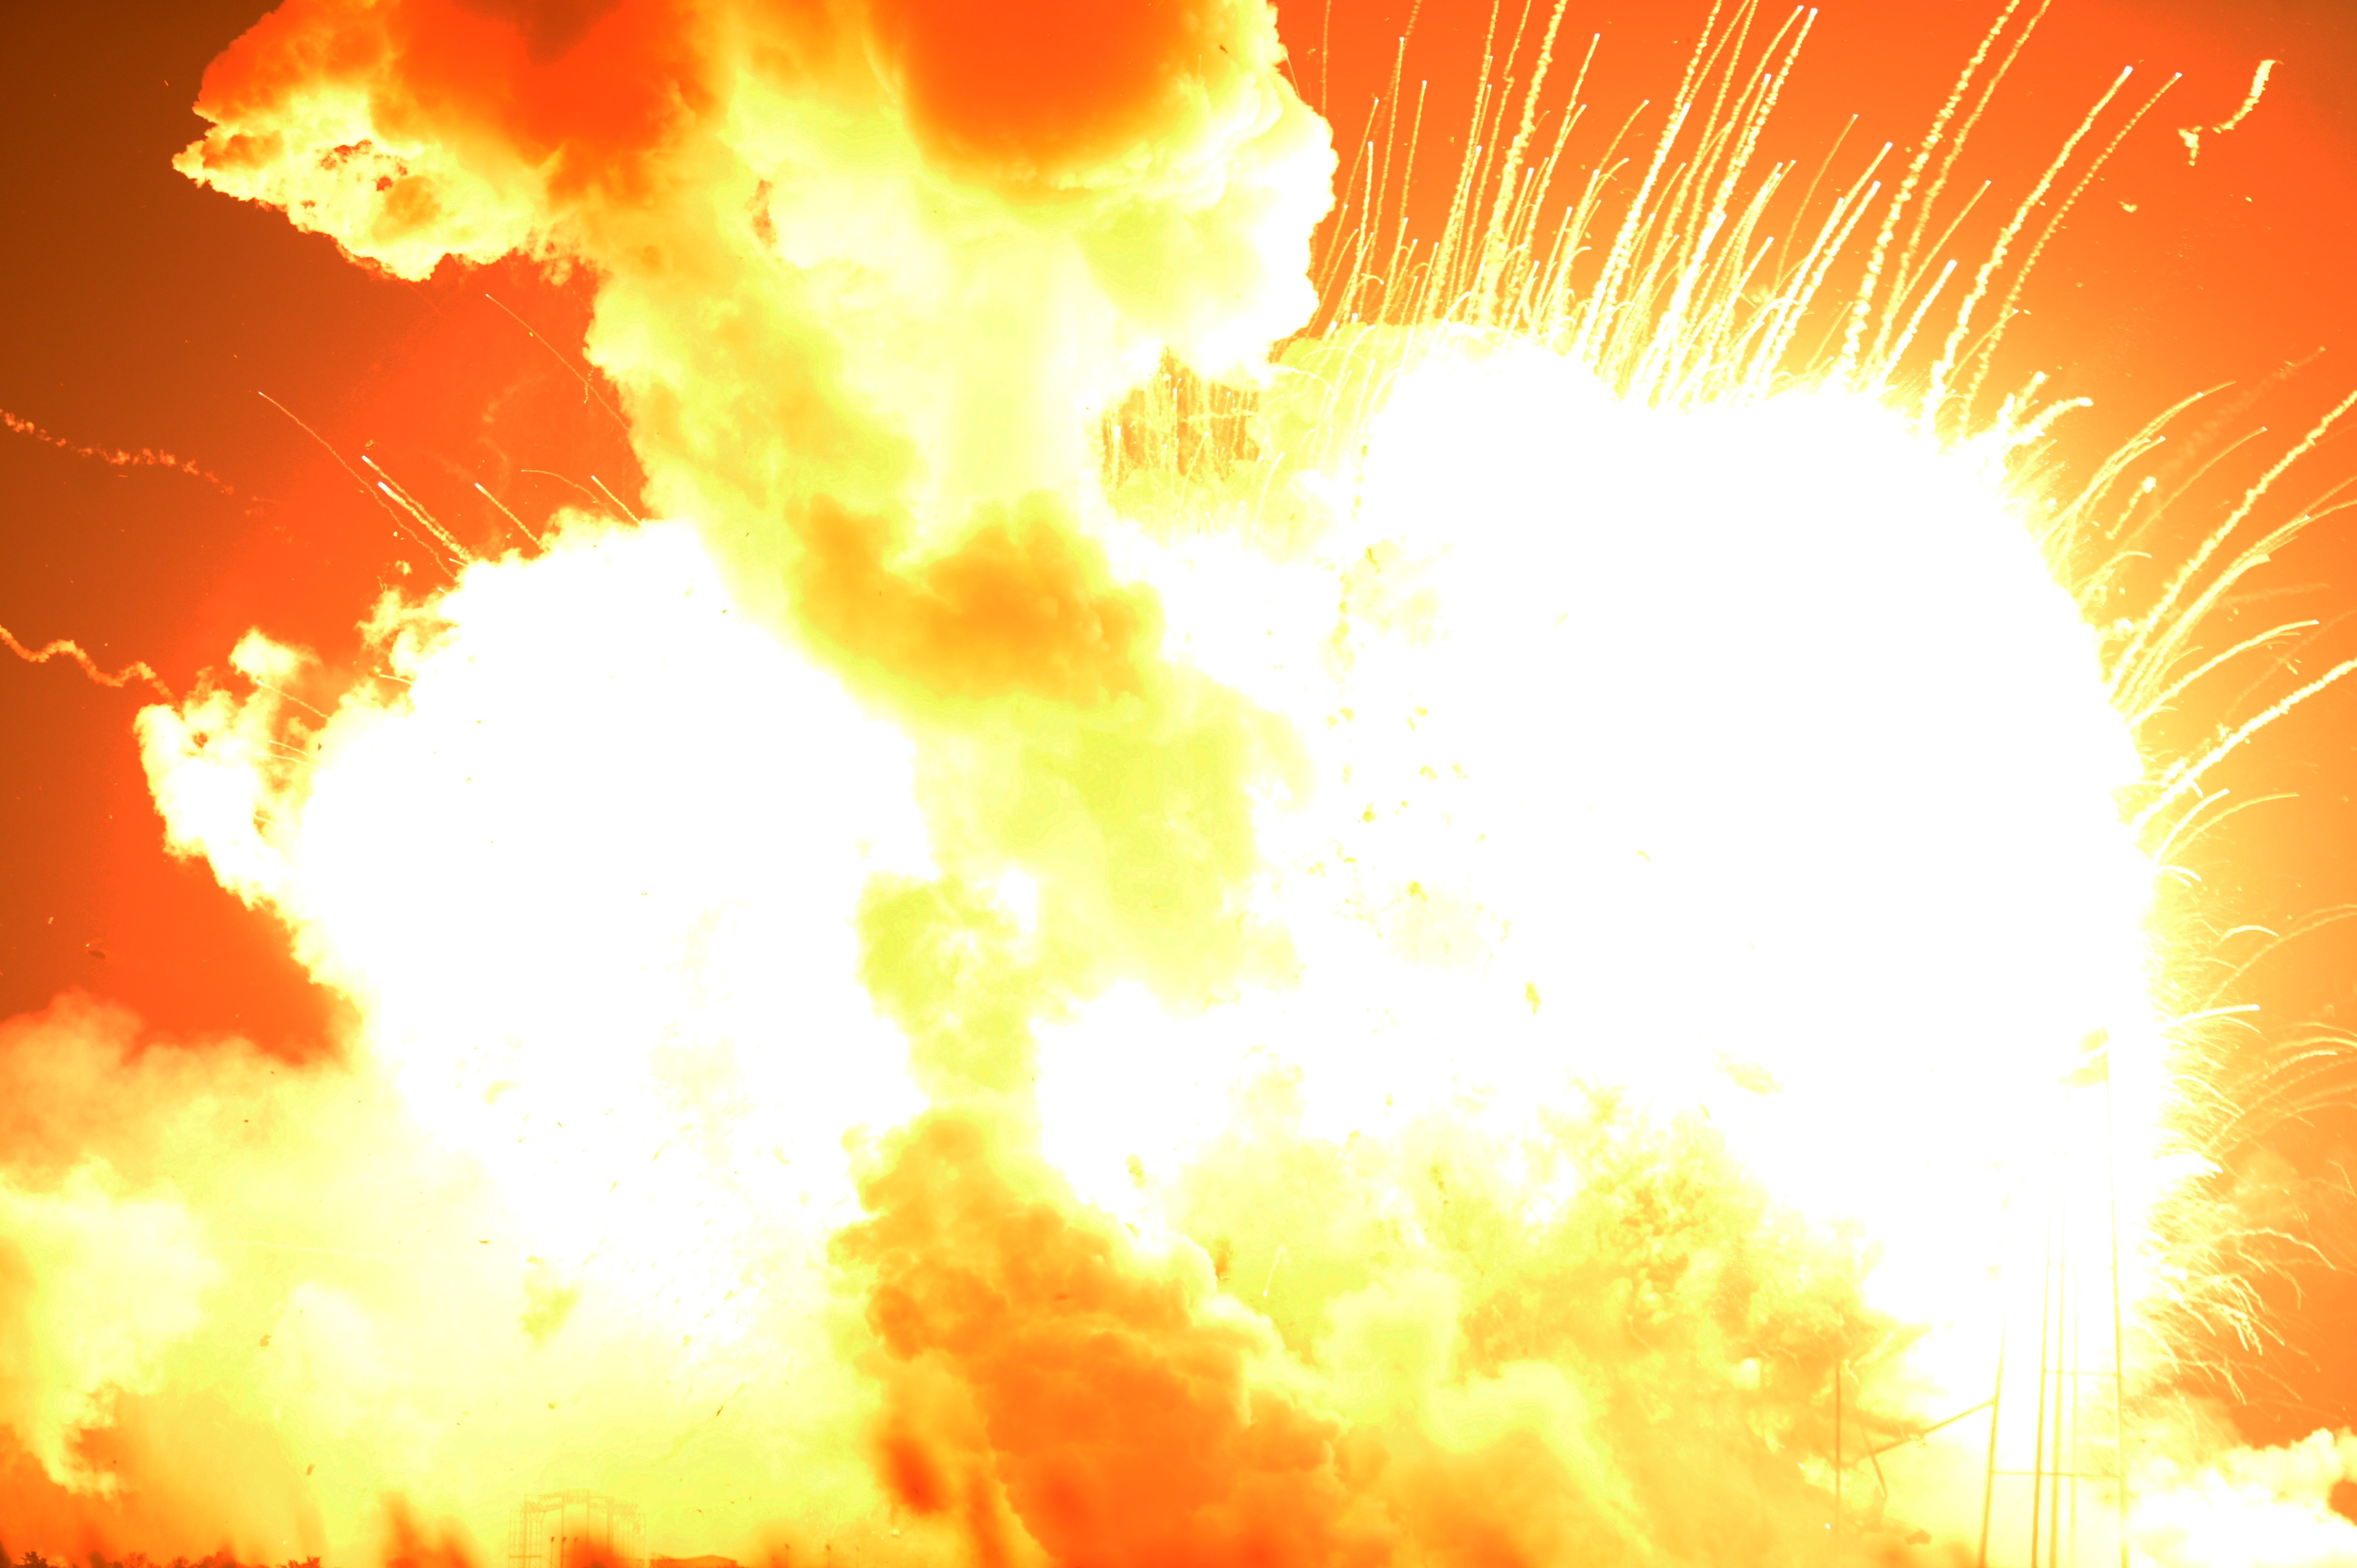 An unmanned Orbital Sciences Corp.'s Antares rocket explodes shortly after takeoff at Wallops Flight Facility on Wallops Island, Va. on Oct. 28, 2014. (Jay Diem—AP)